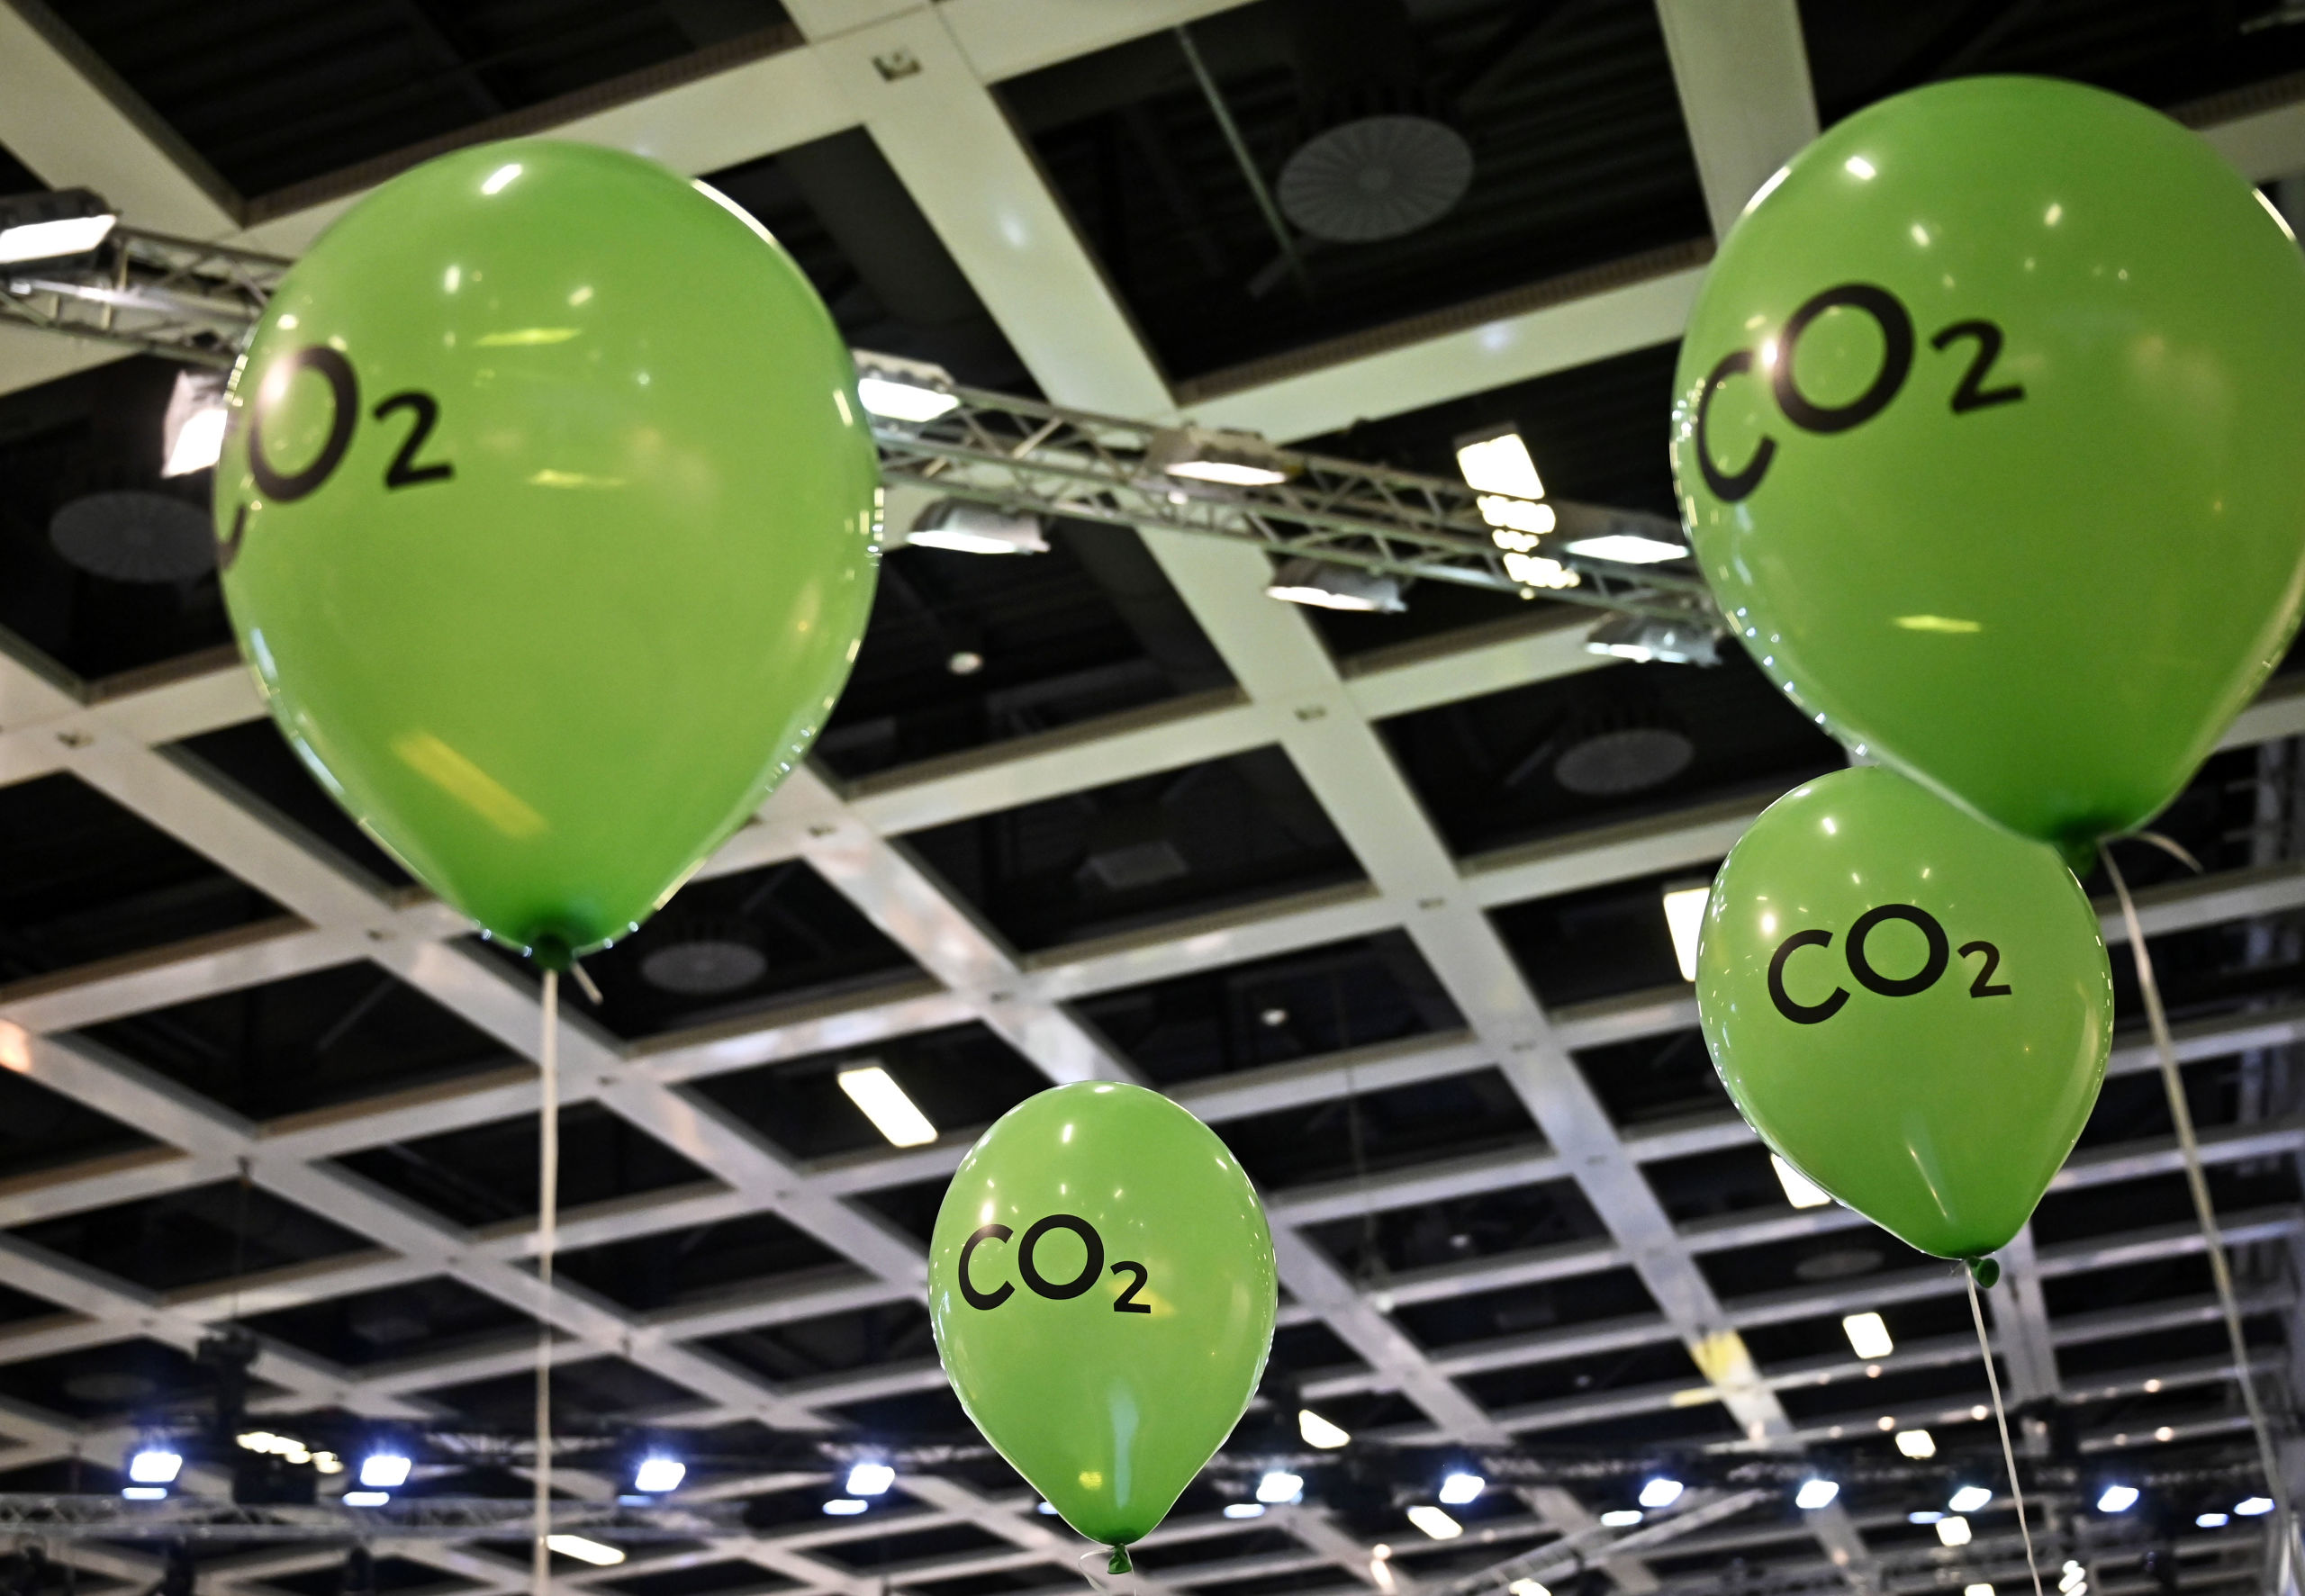 2020-01-17 11:17:24 Green ballons bearing the inscription "CO2" are fluttering in a hall during the opening day of the Gruene Woche (Green Week) international agriculture fair in Berlin on January 17, 2020. The fair officially opens on January 17, 2020 and runs until January 26, with Croatia as partner country of the Green Week 2020.  Tobias SCHWARZ / AFP